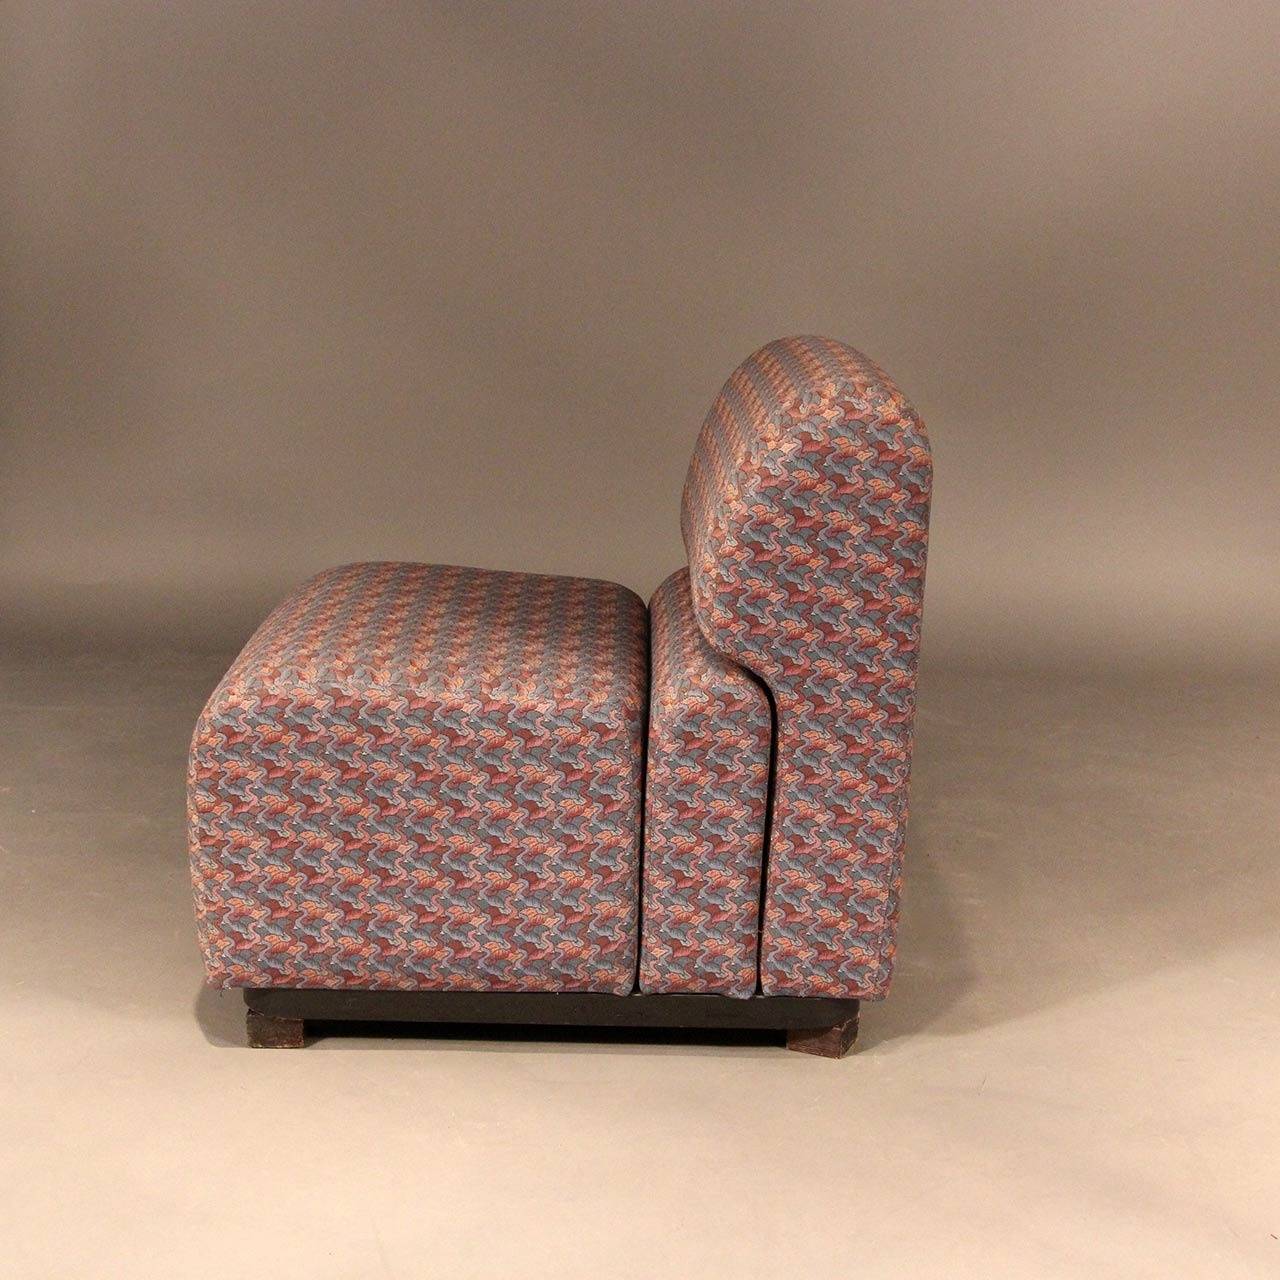 Late 20th Century Sculptural Chair Influenced by Pierre Paulin and M.C. Escher